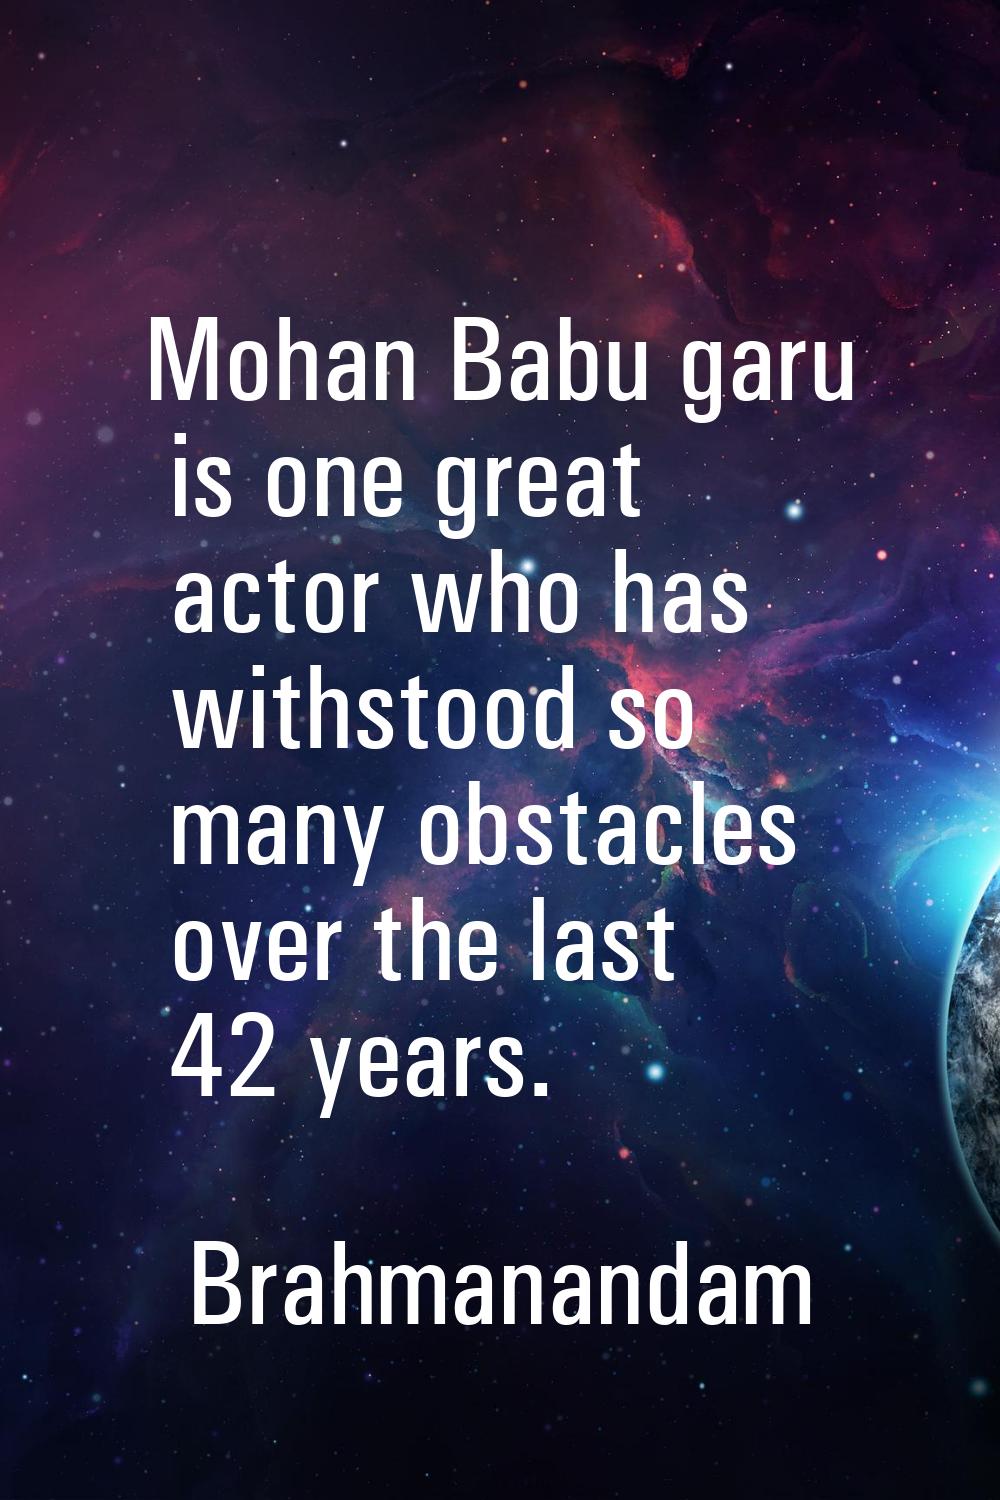 Mohan Babu garu is one great actor who has withstood so many obstacles over the last 42 years.